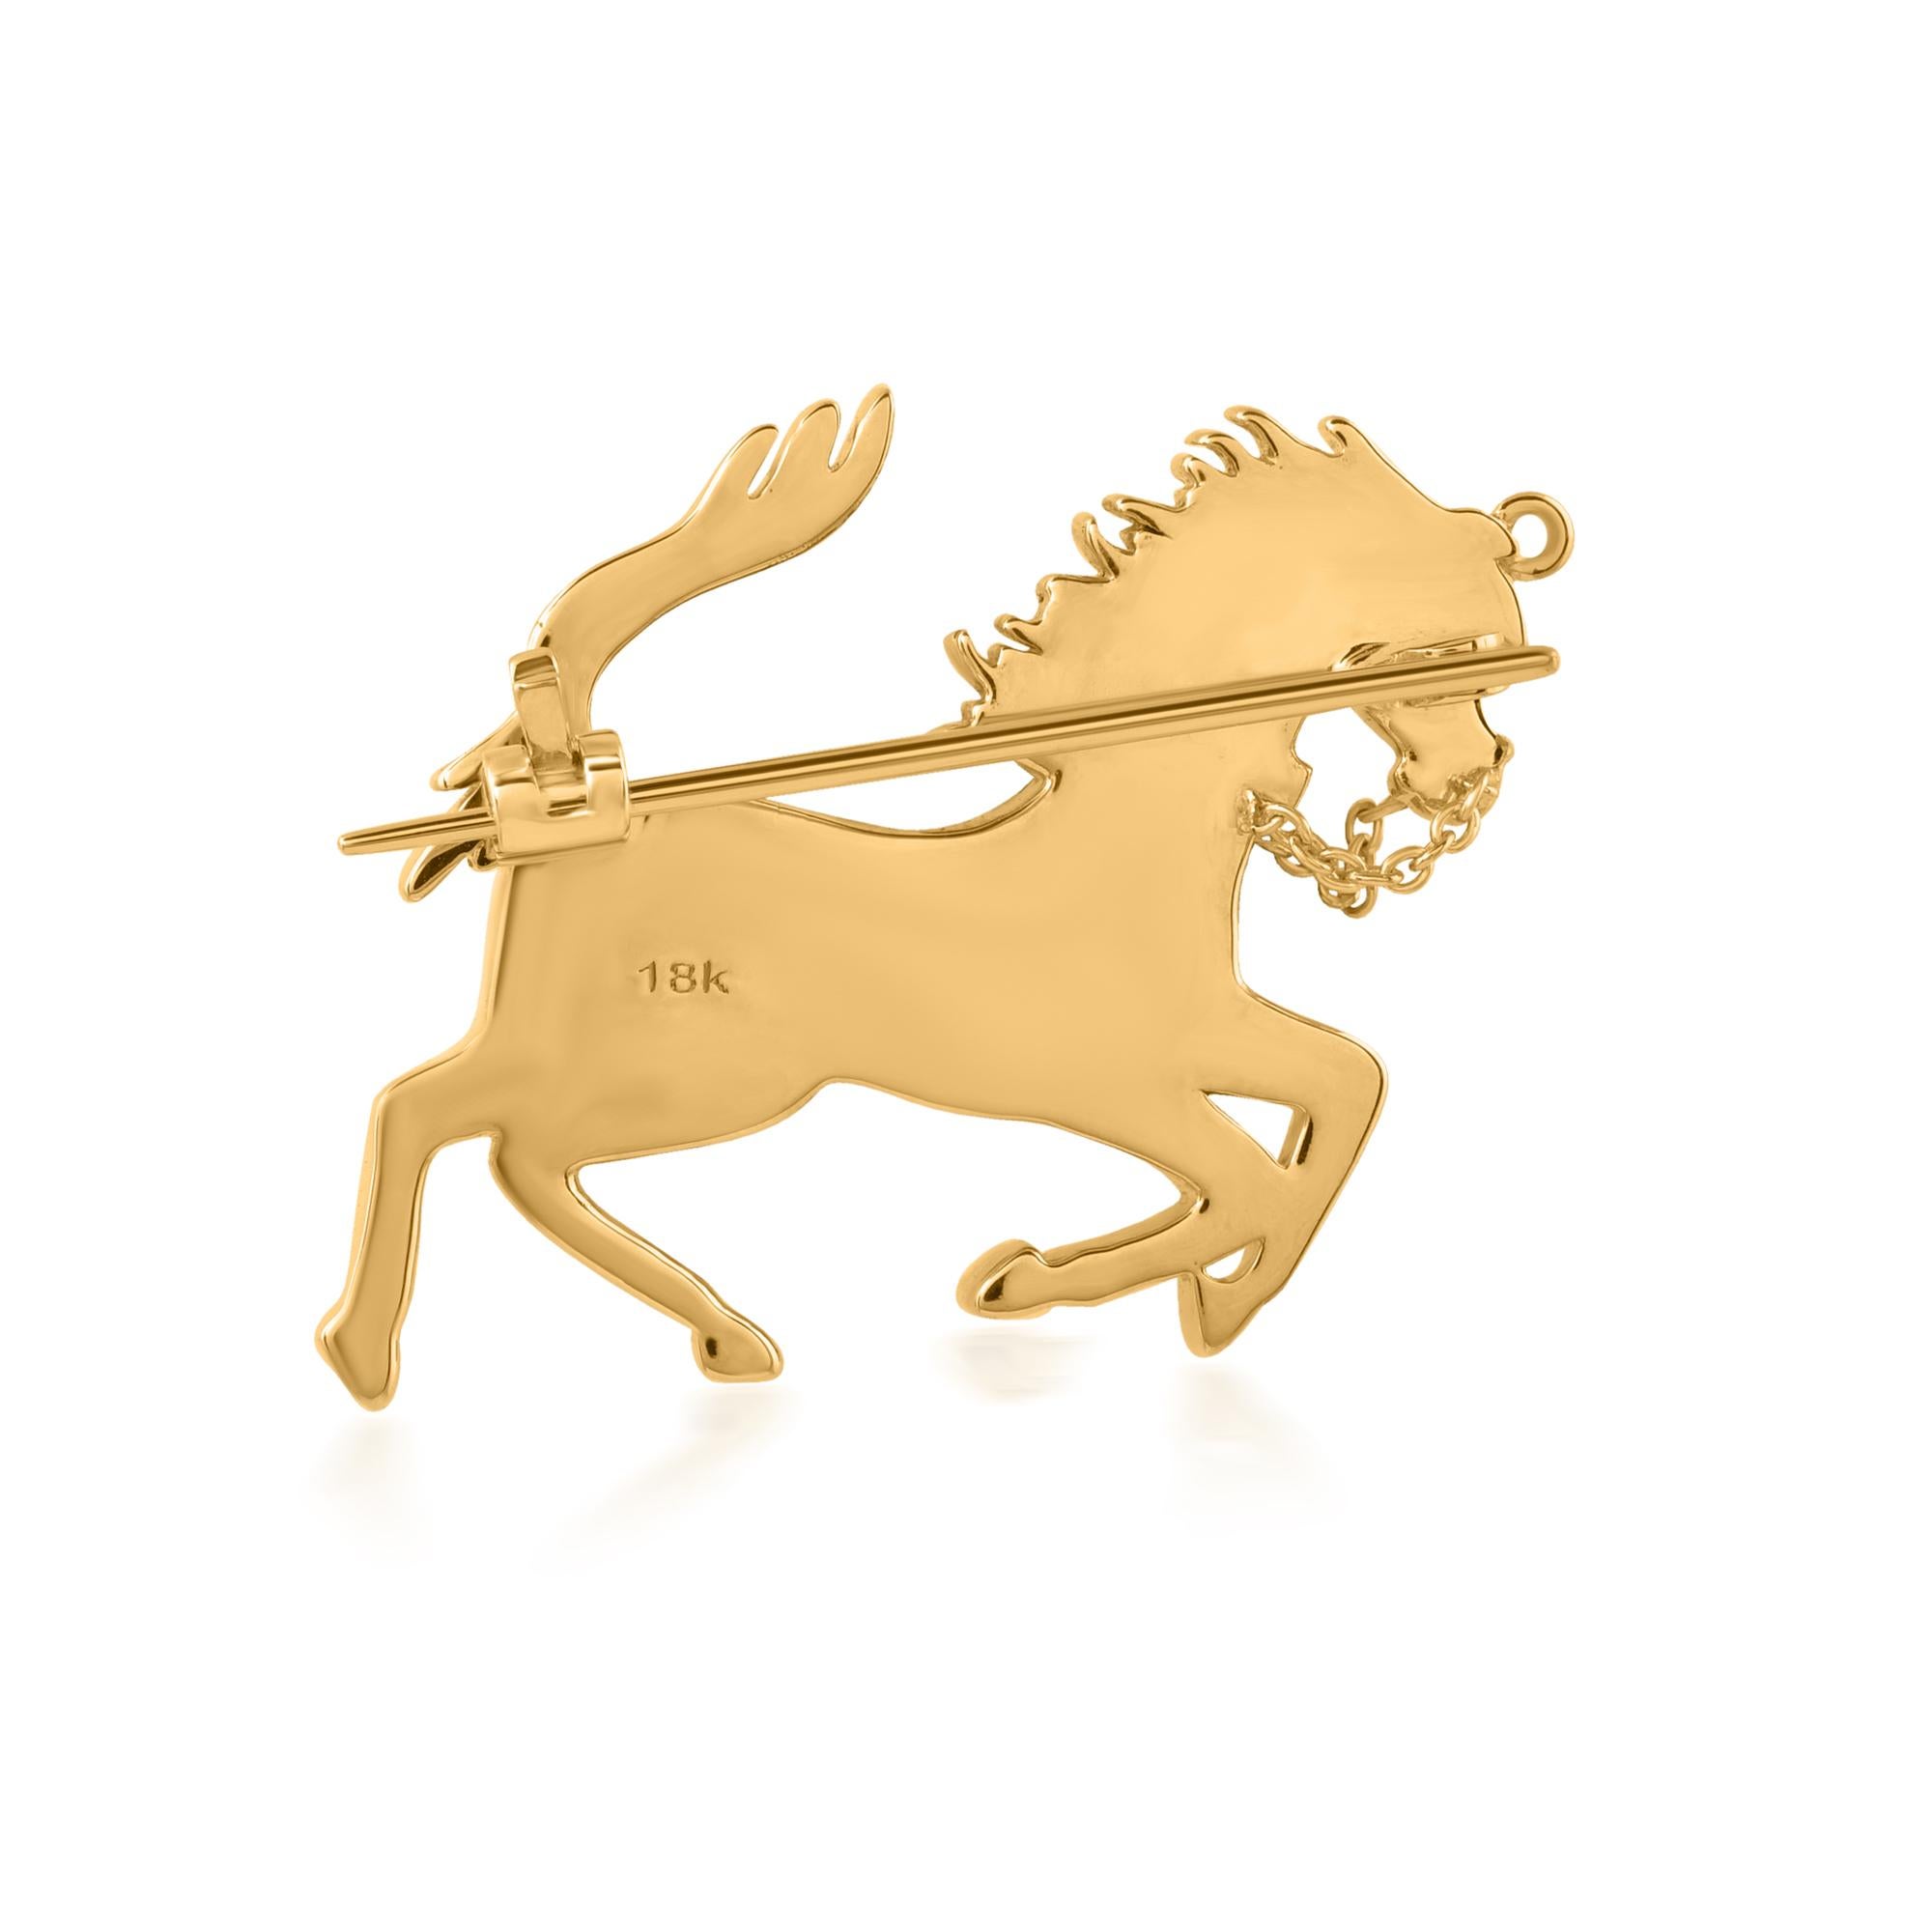 Perfect for horse lovers and admirers of fine jewelry alike, this Natural SI Clarity HI Color Diamond Horse Pendant Brooch is a symbol of strength, beauty, and grace. With its timeless appeal and undeniable charm, it is sure to captivate the